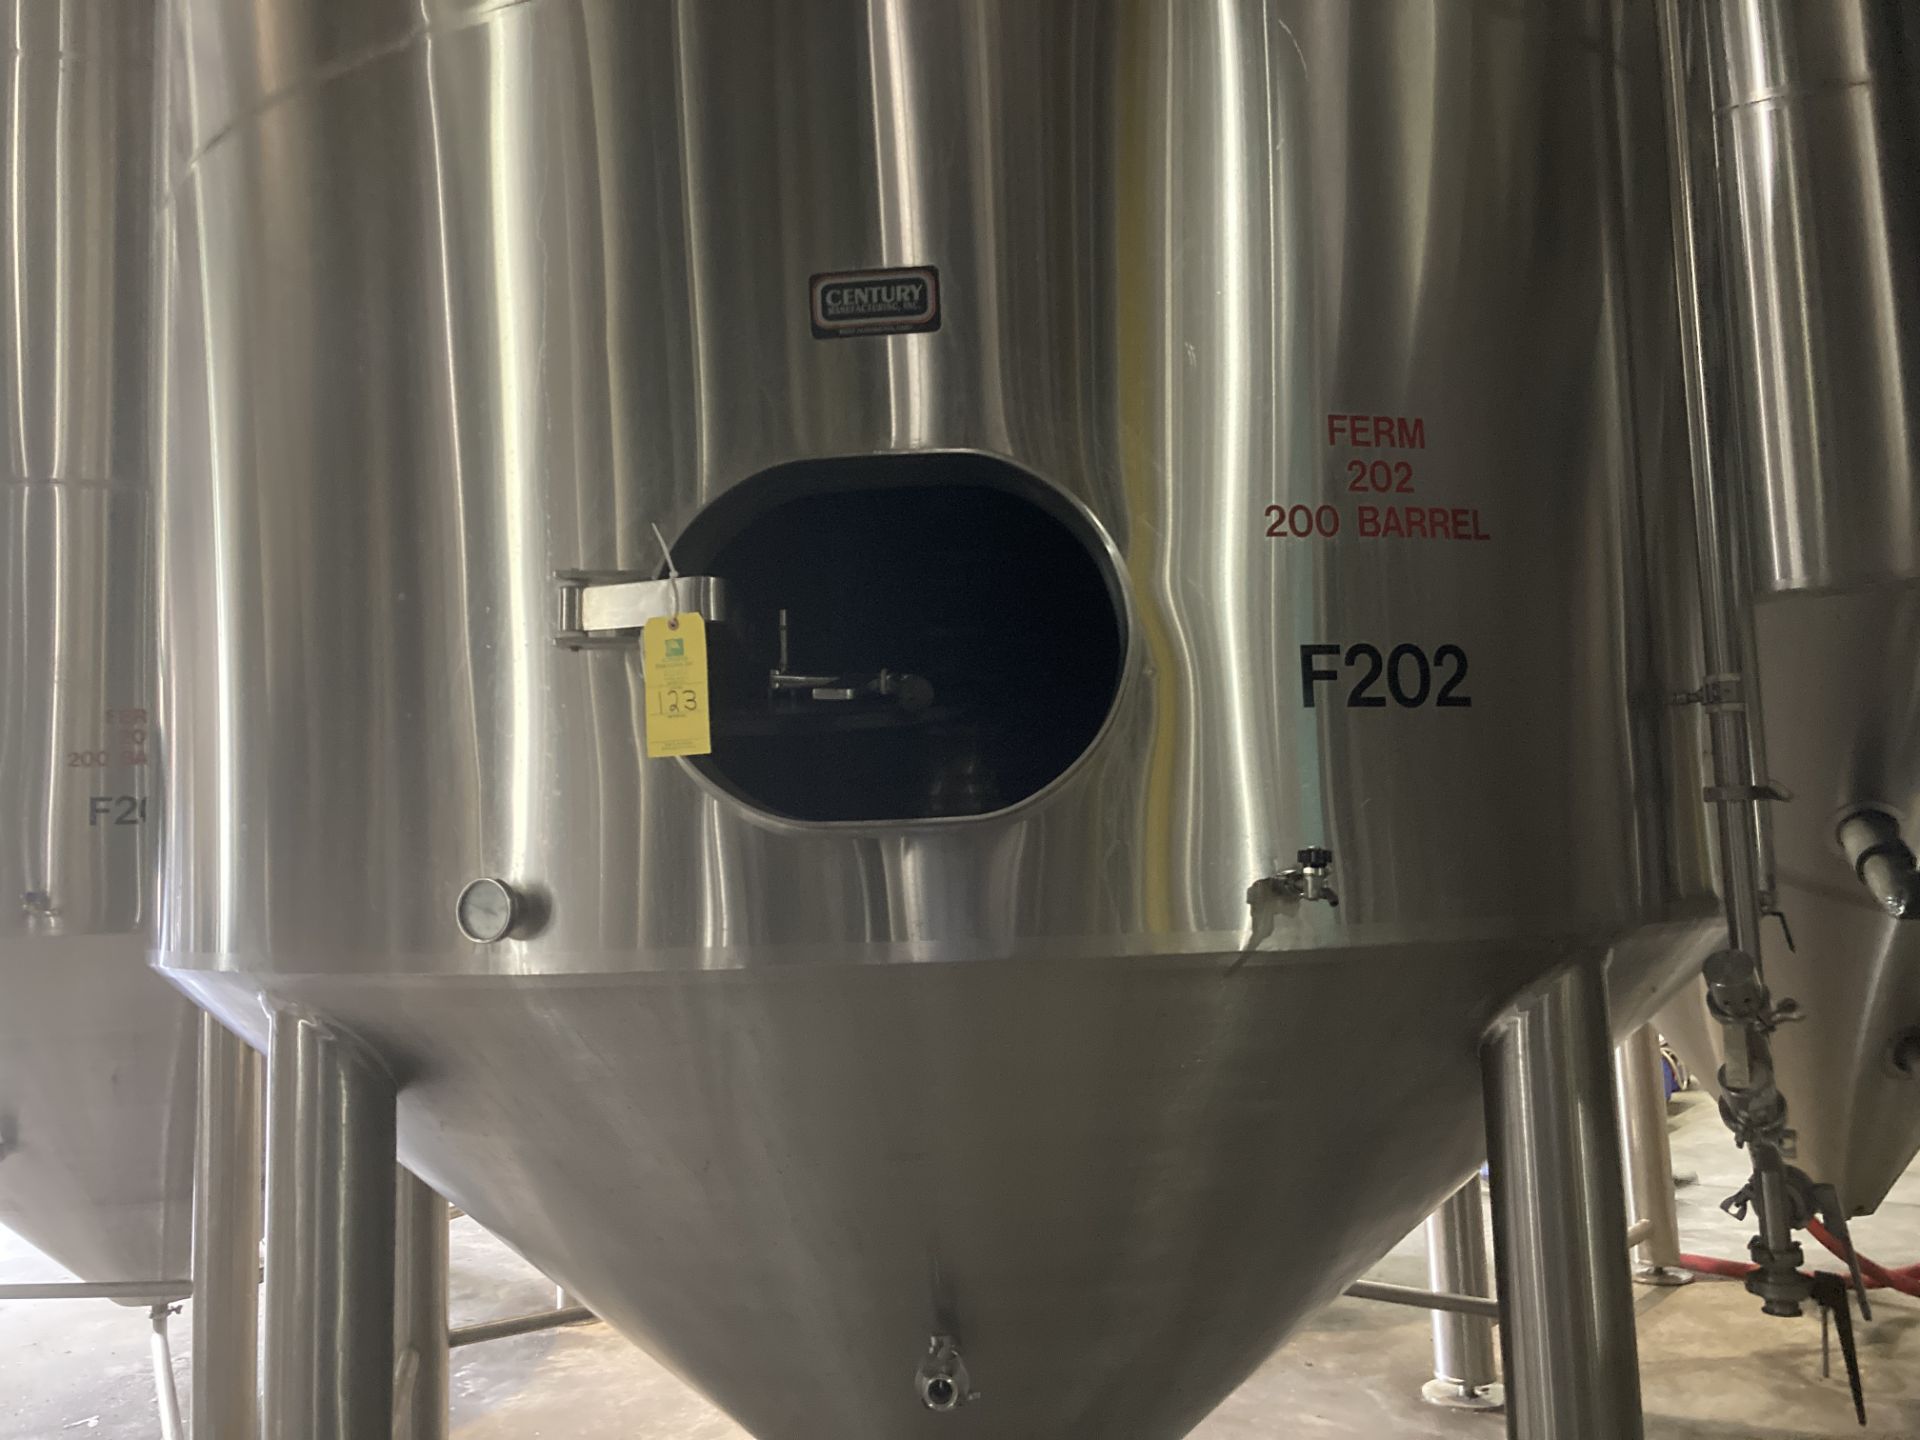 Century 200 bbl stainless steel cone bottom glycol jacket insulated fermenter tank, serial 1366-01A, - Image 2 of 3